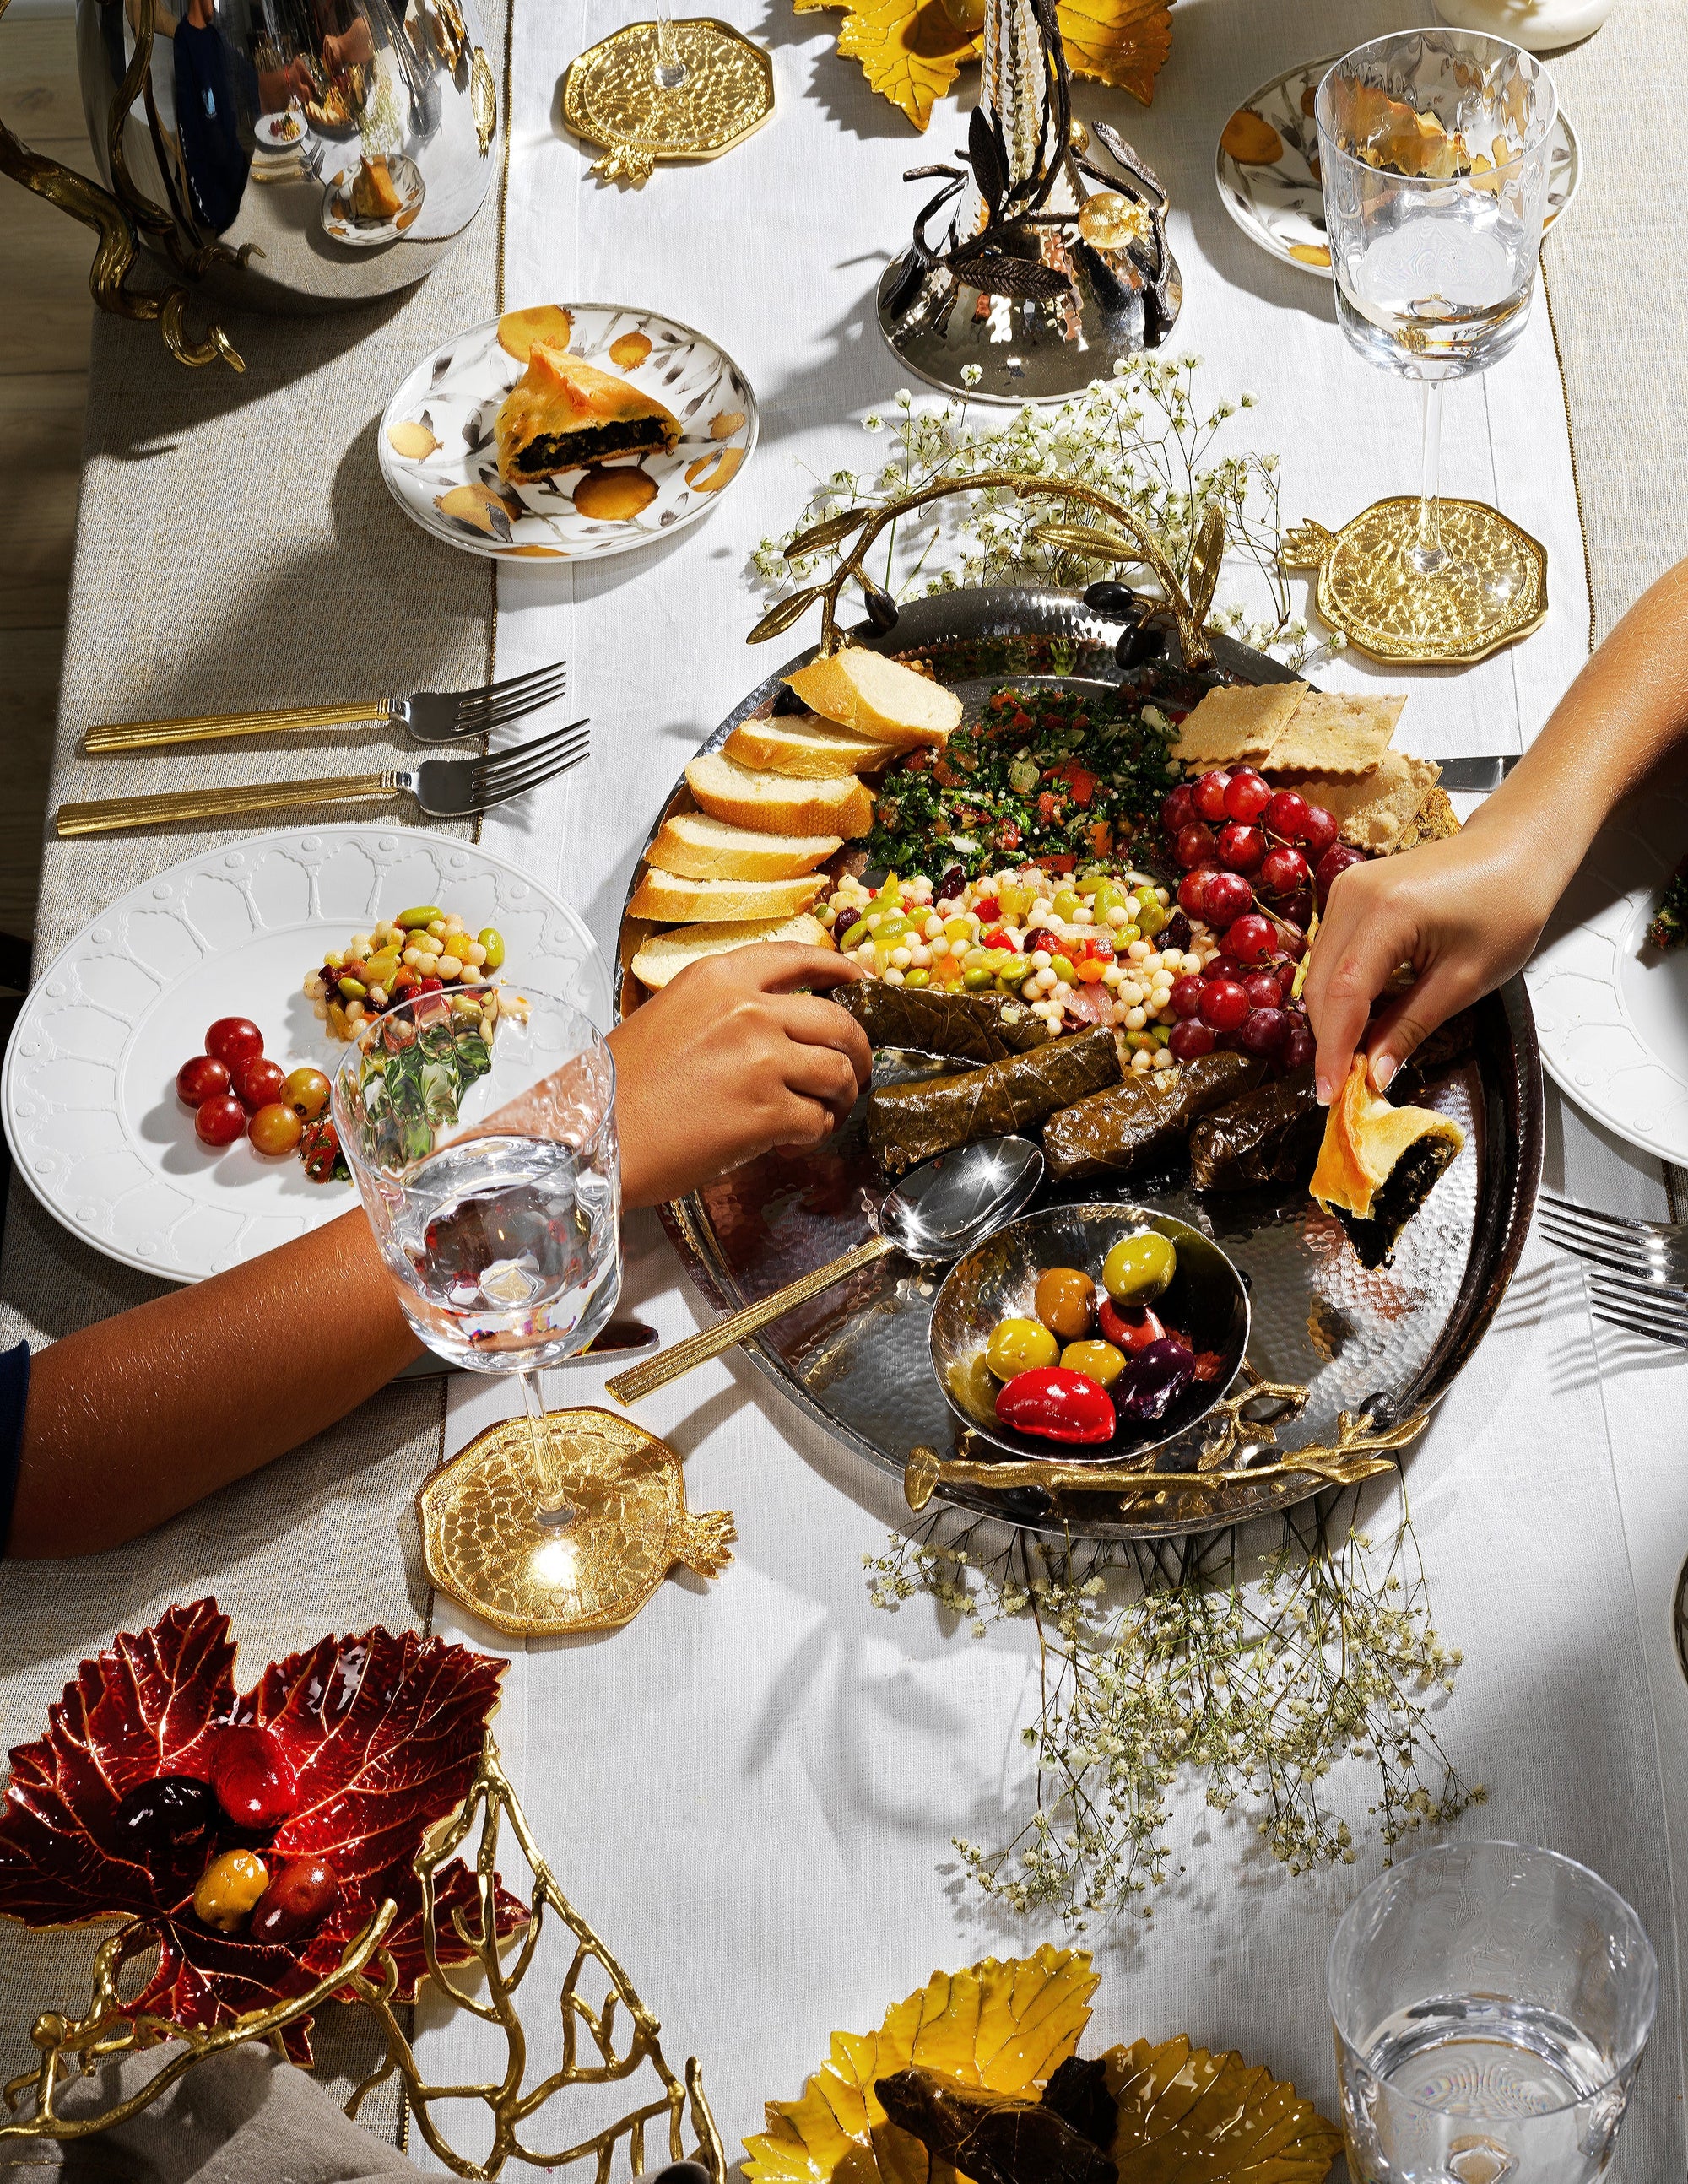 Fall Favorites: How To Create The Perfect Tabletop For A Family-Style Gathering - Michael Aram